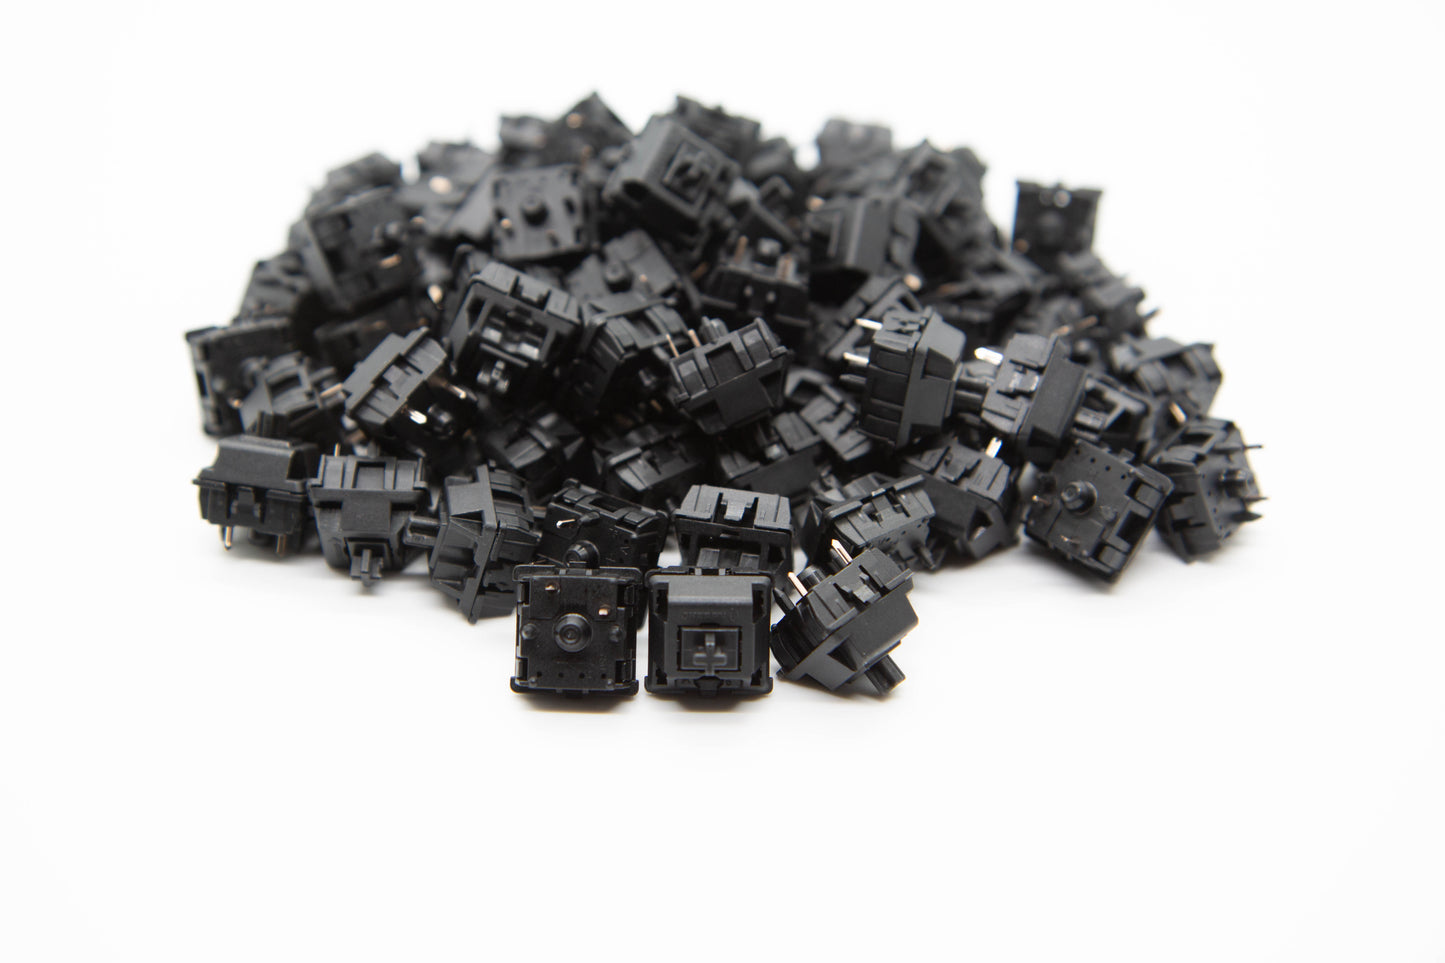 Close up shot of a pile of Cherry Hyperglide Black mechanical keyboard switches featuring black housing and black stems